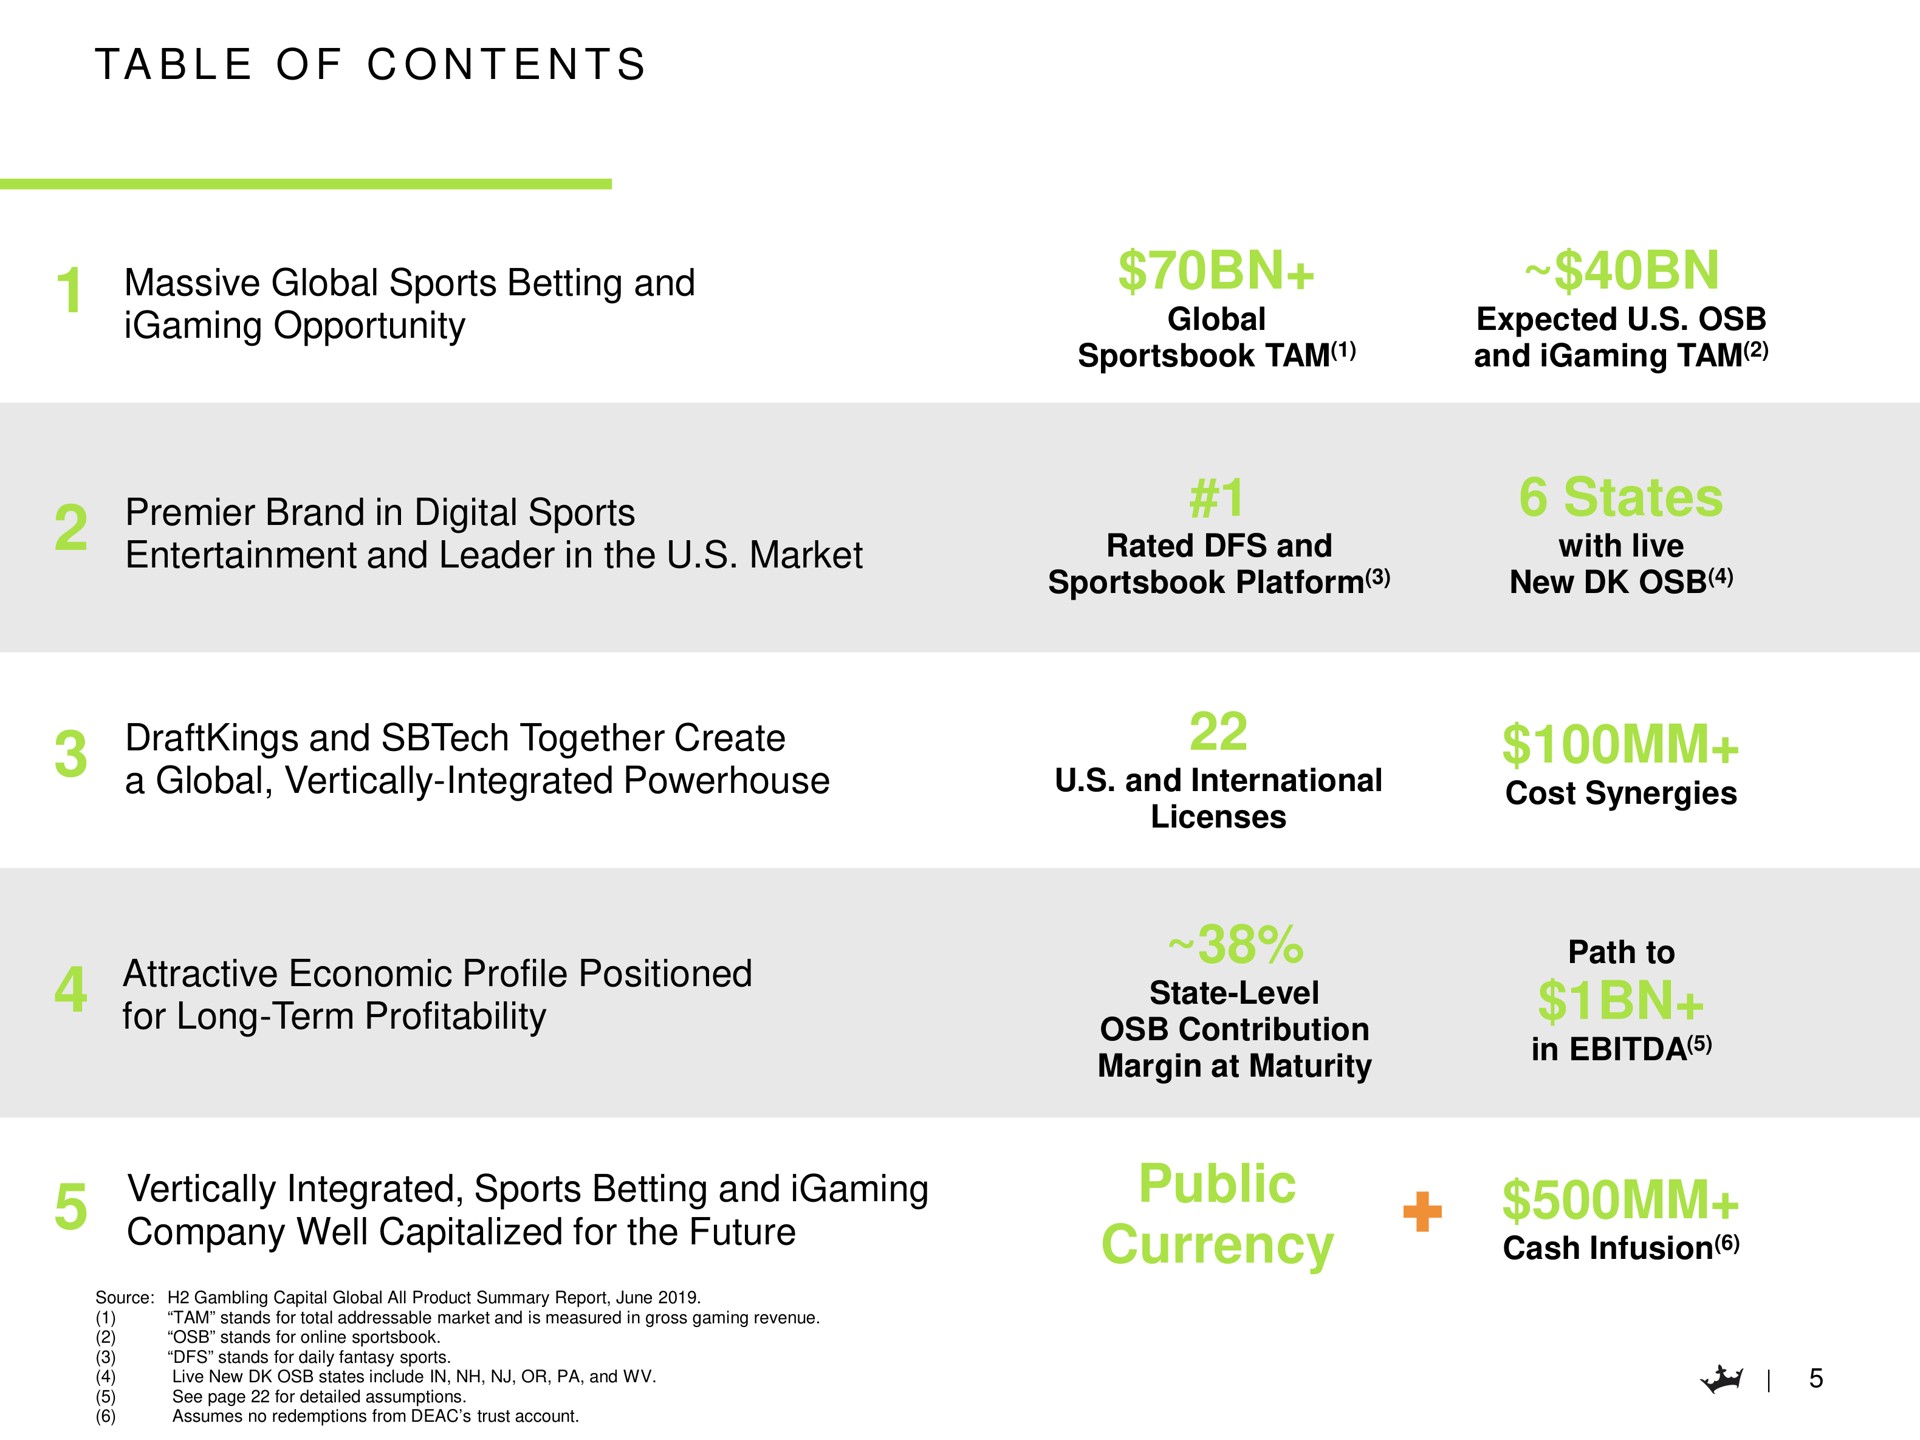 massive global sports betting and opportunity premier brand in digital sports entertainment and leader in the market states and together create a global vertically integrated powerhouse attractive economic profile positioned for long term profitability vertically integrated sports betting and company well capitalized for the future public currency table of contents tam tam rated with live international state level margin at maturity i | DraftKings